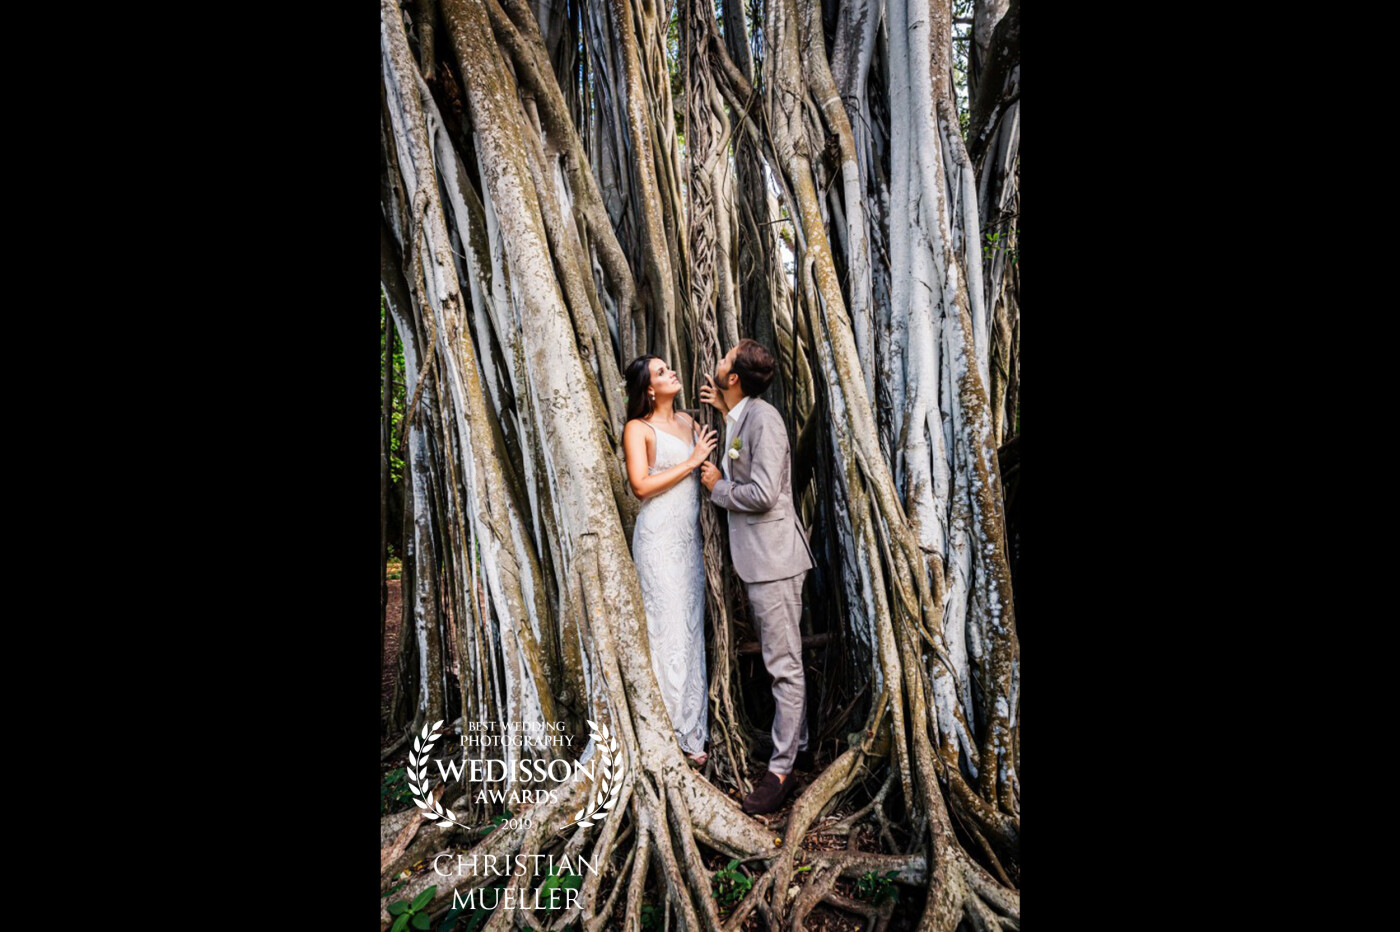 It was a great experience to photograph my first destination wedding on Oahu, Hawaii, with this lovely couple. Ahead of the wedding I searched in the web for good locations and found this awesome, huge banyan tree in a regional park, 20 minutes far away from their venue. The aspiring roots give perfect imagery for their marital happiness.